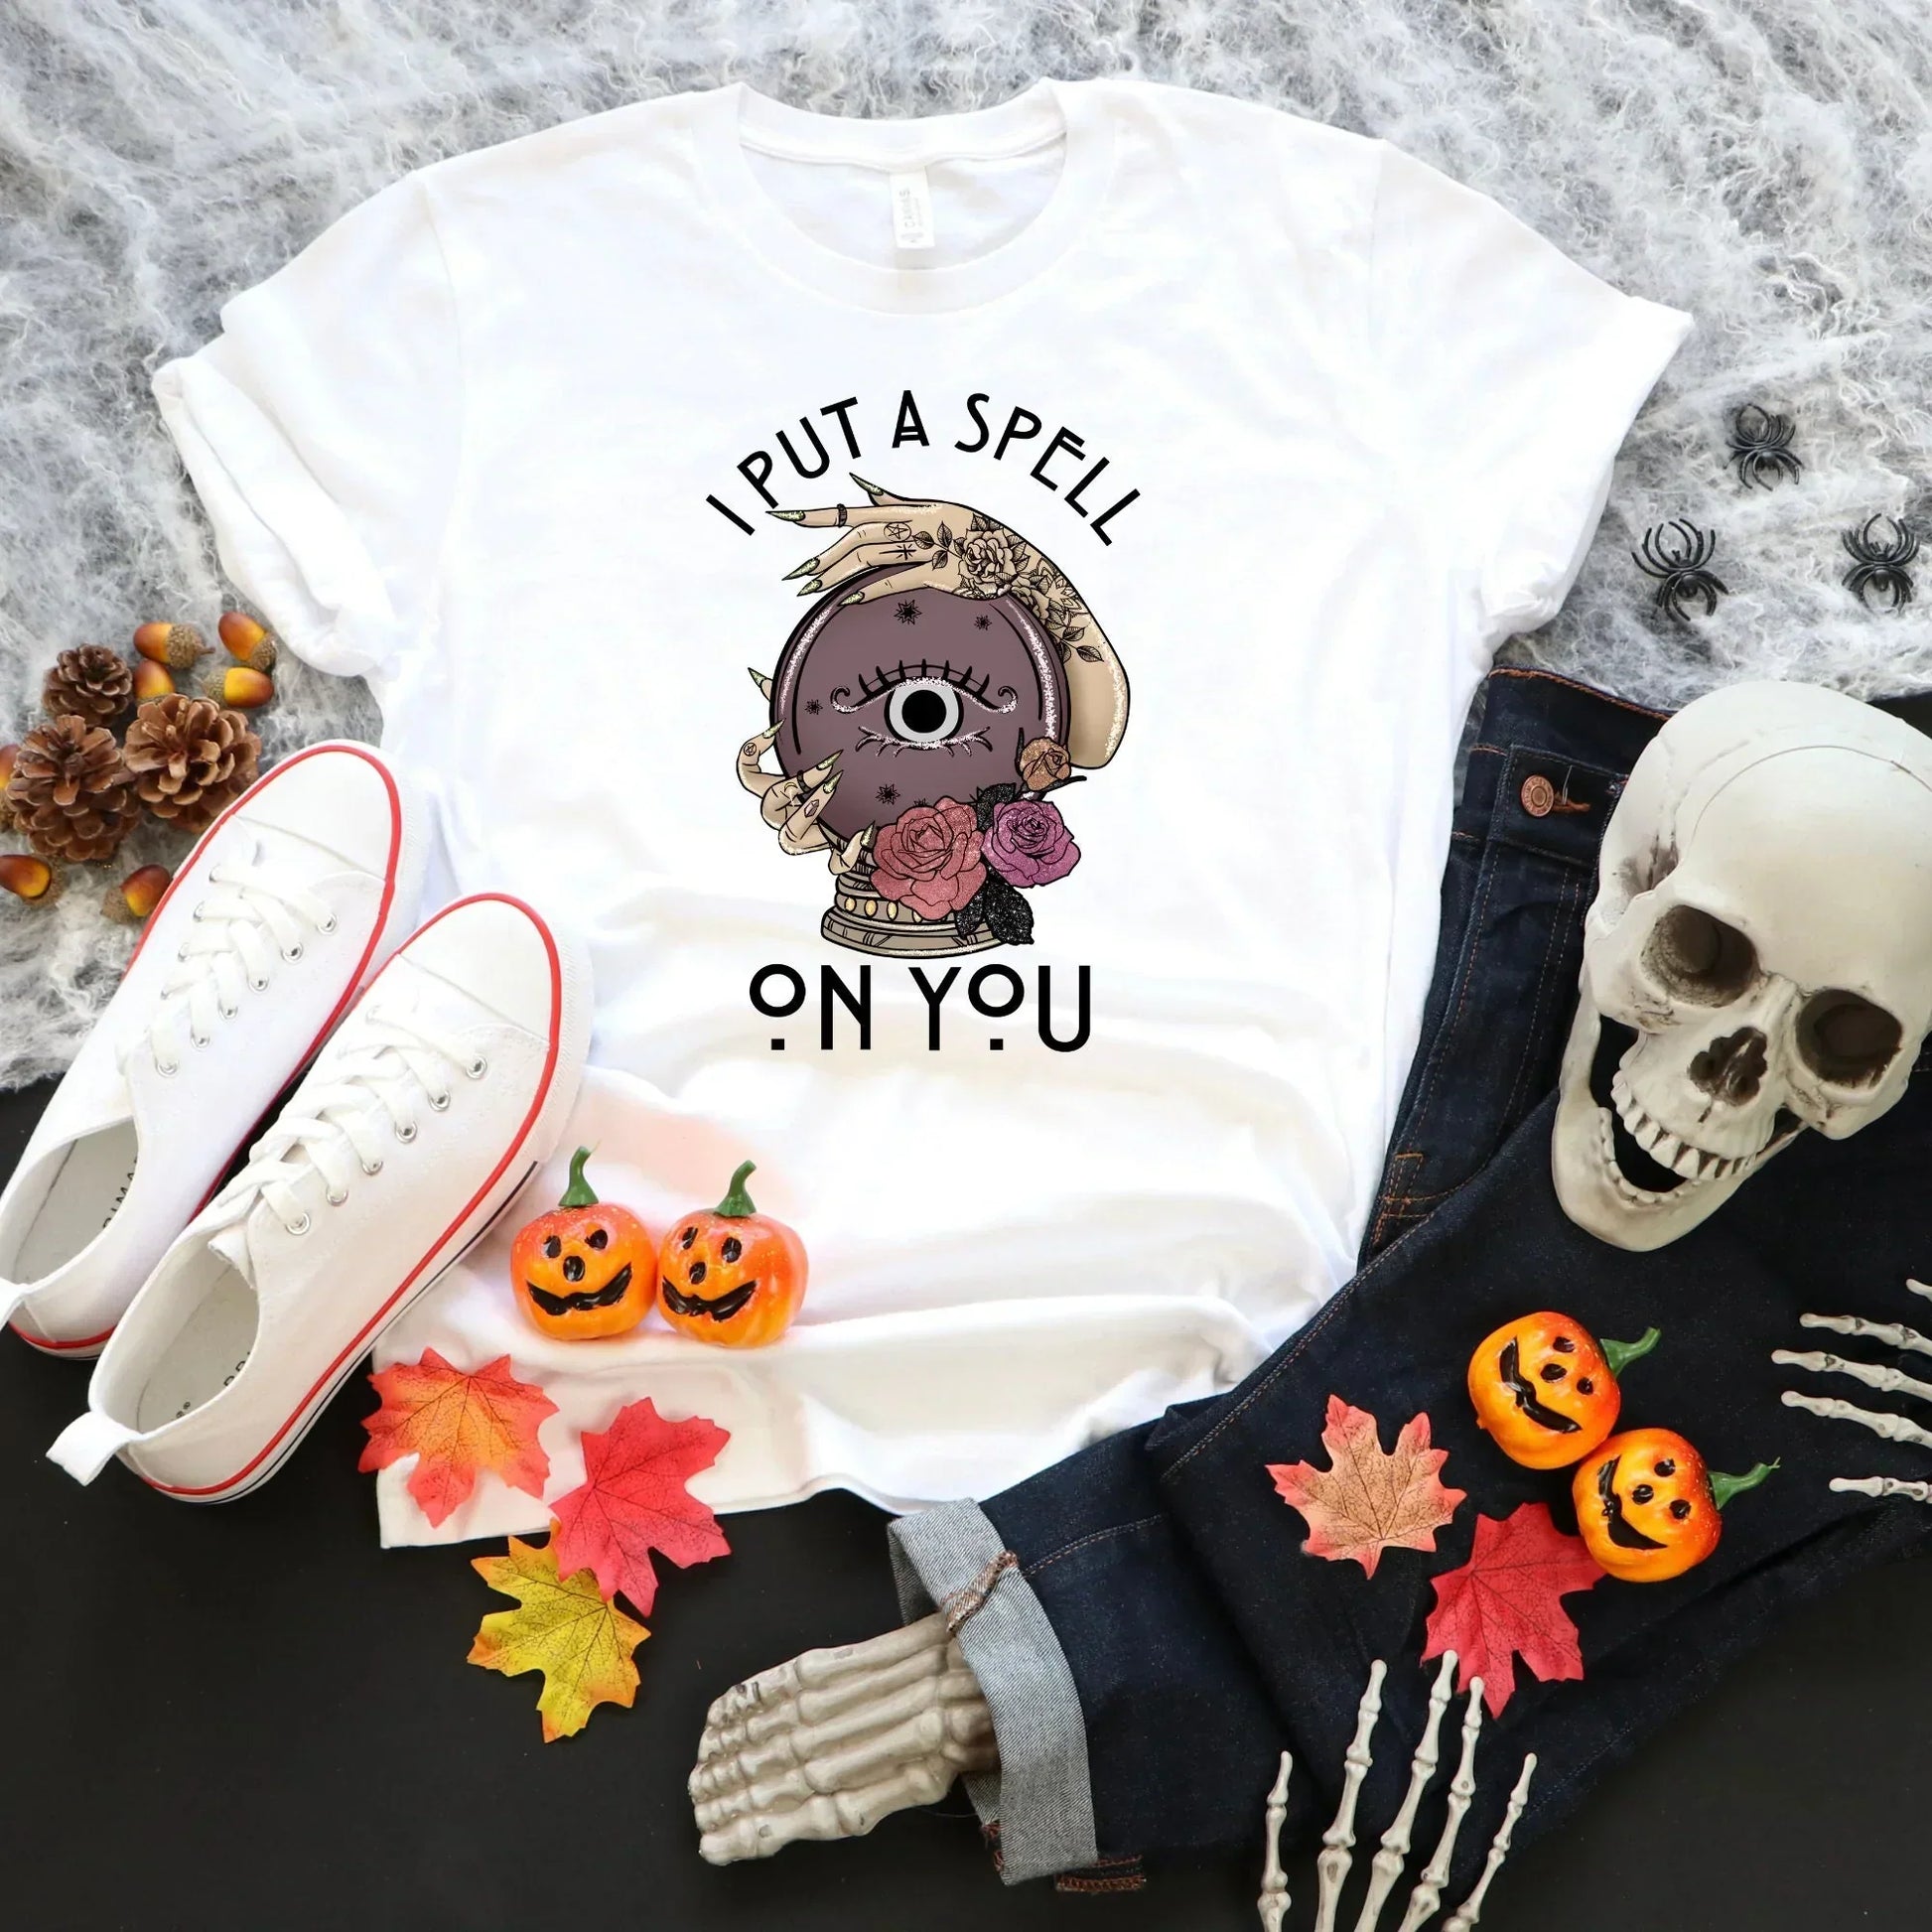 Halloween Shirt, Halloween Pastel Gothic Tee, Witchy Vibes Halloween Sweater, Magical Witch, Goth Style, I put a spell on you, Crystal Ball